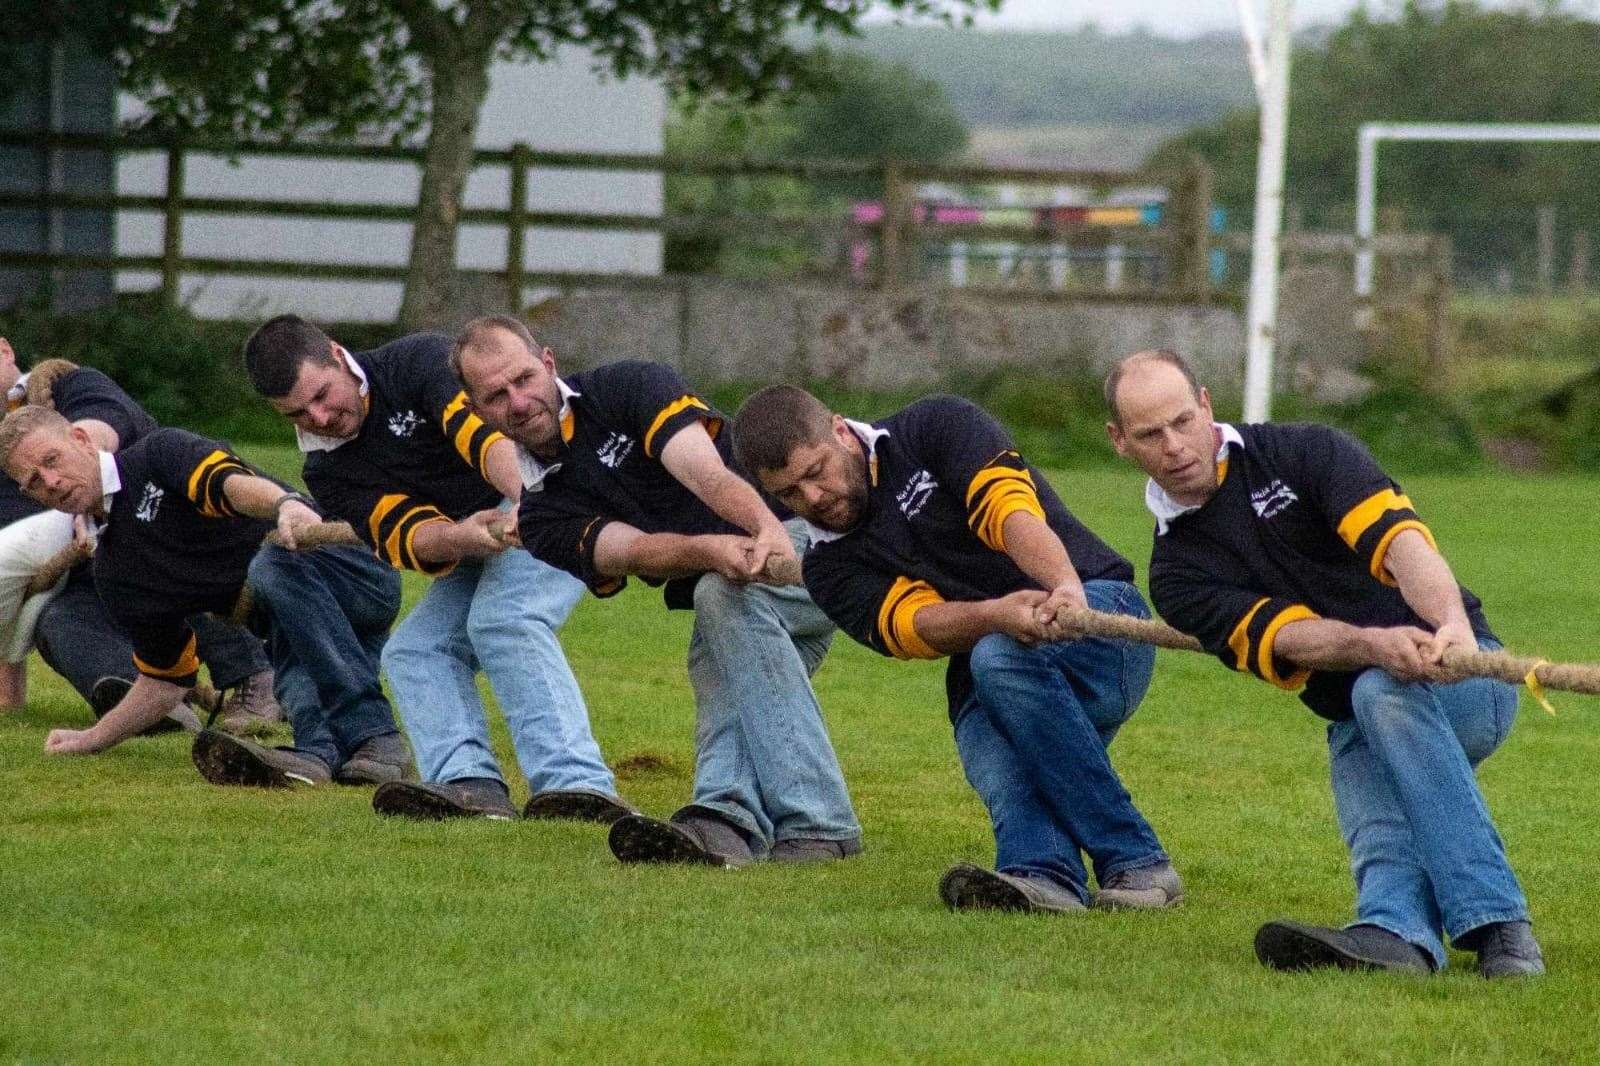 The tug-of-war competition is a favourite.